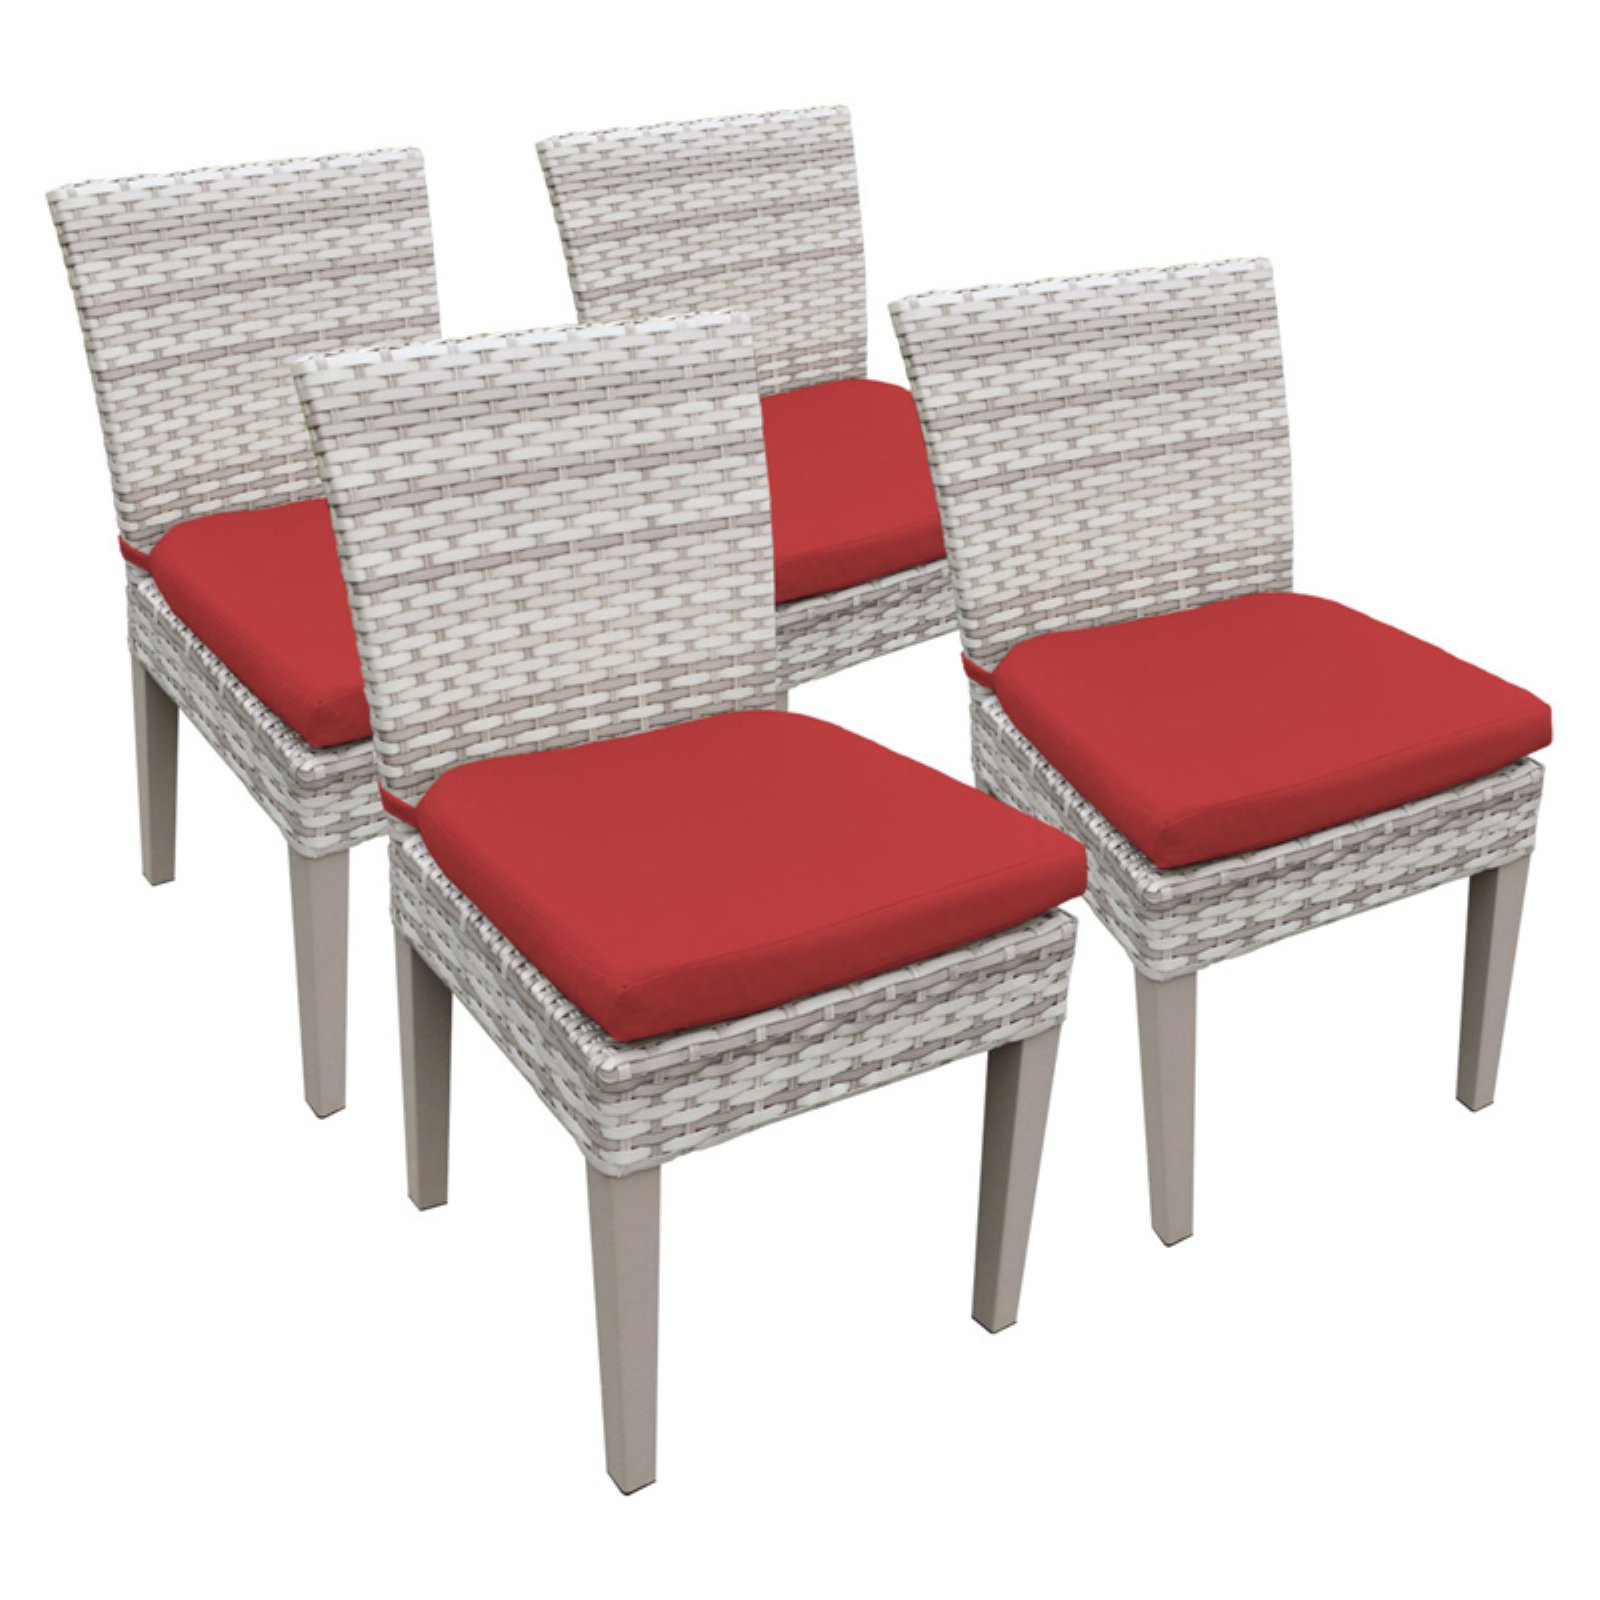 TK Classics Fairmont Armless Outdoor Dining Chairs - image 2 of 2